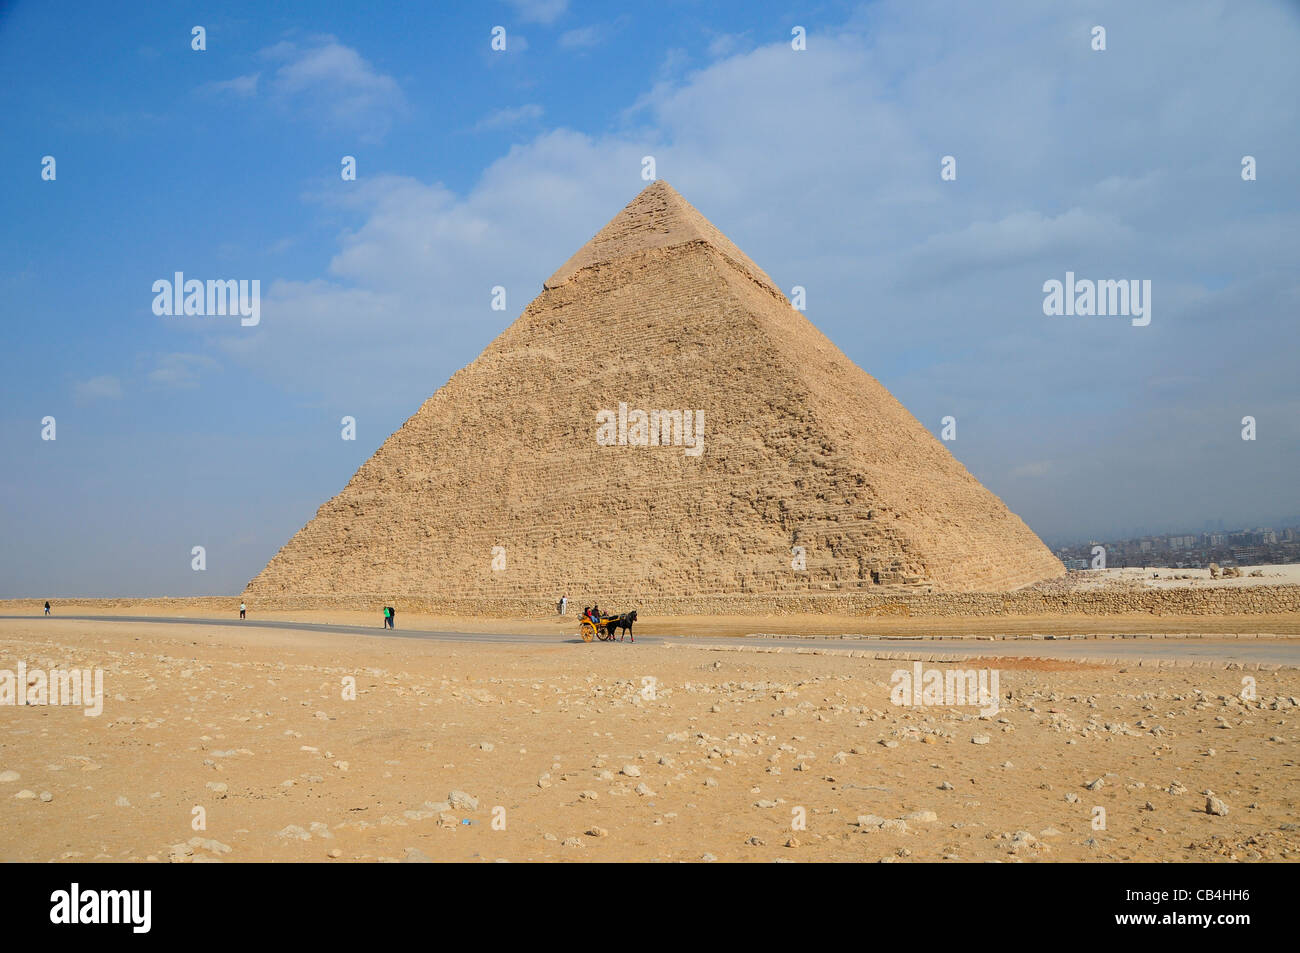 The Great pyramid of Giza at Cairo Egypt. Middle East. Stock Photo